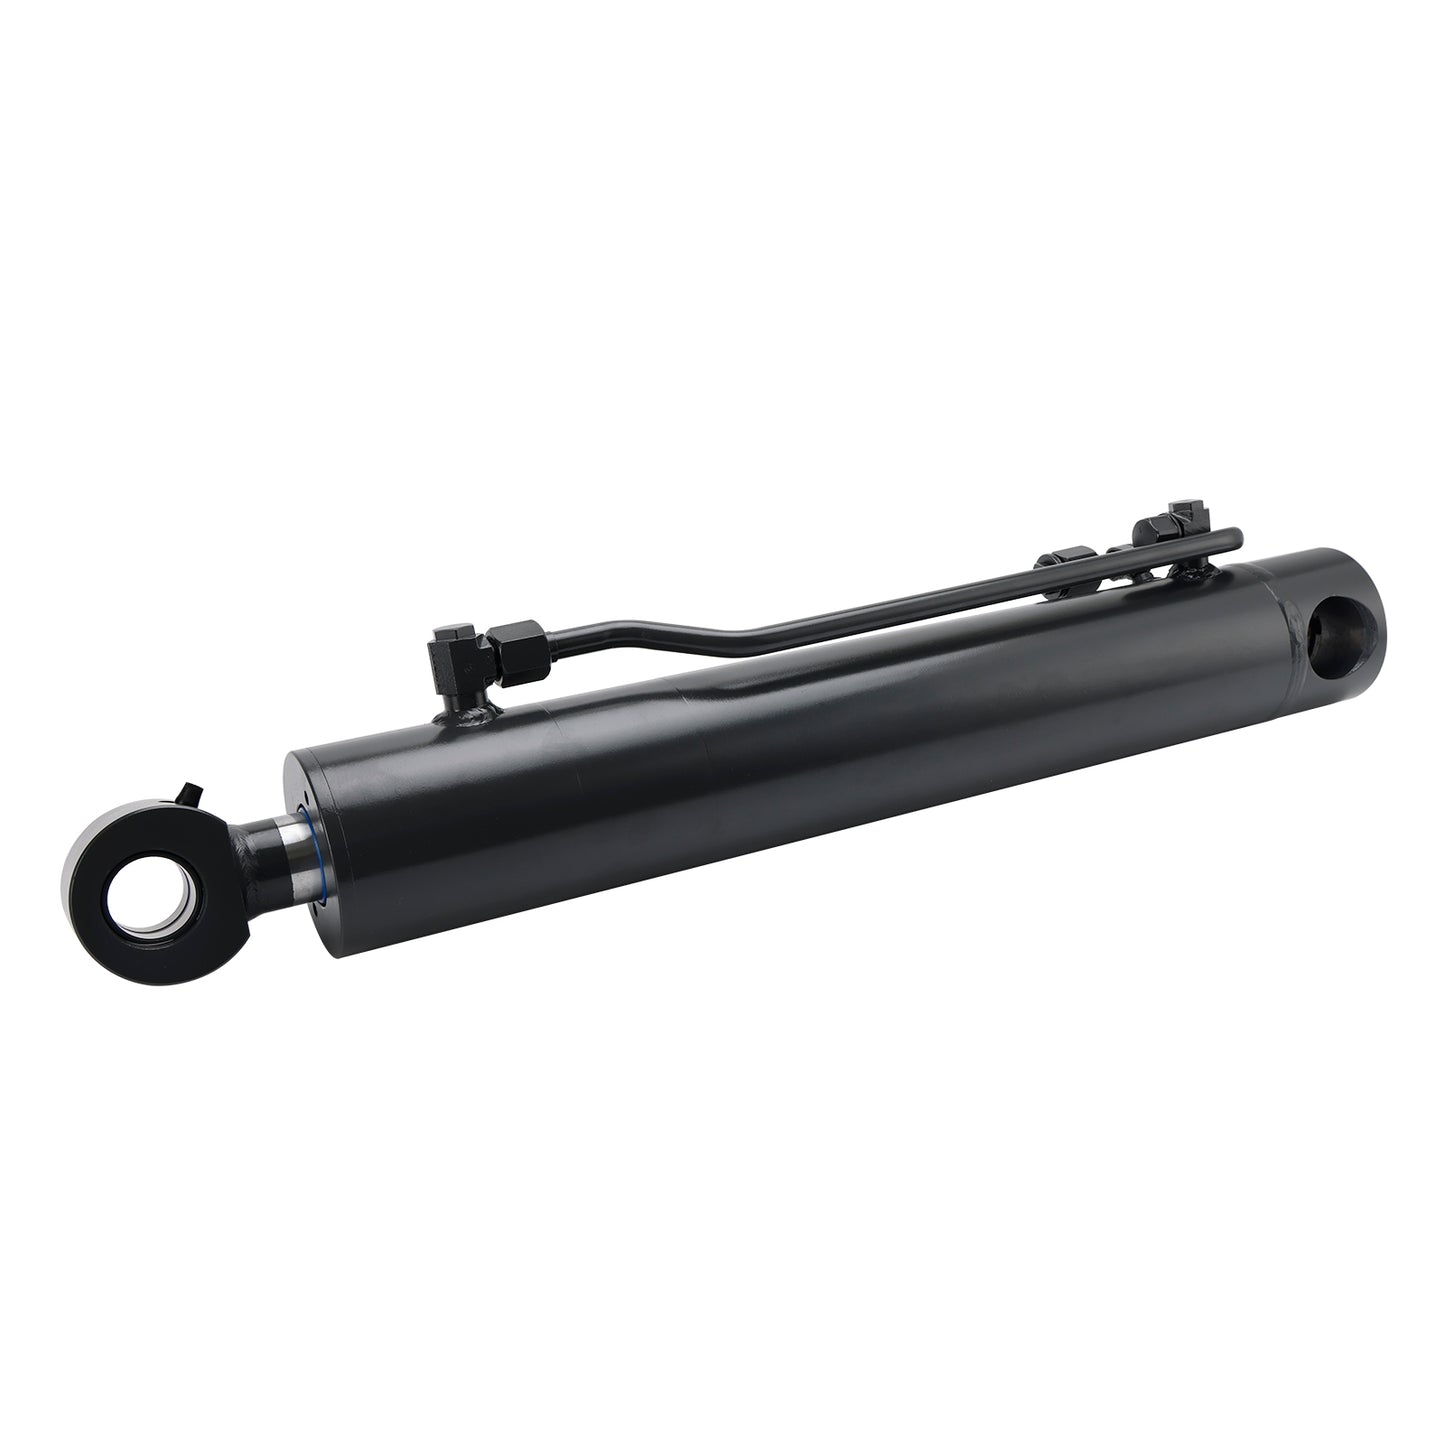 7208419 Hydraulic Tilt Cylinder For Bobcat S220 S250 S300 S330 T250 T300 A300 Generic